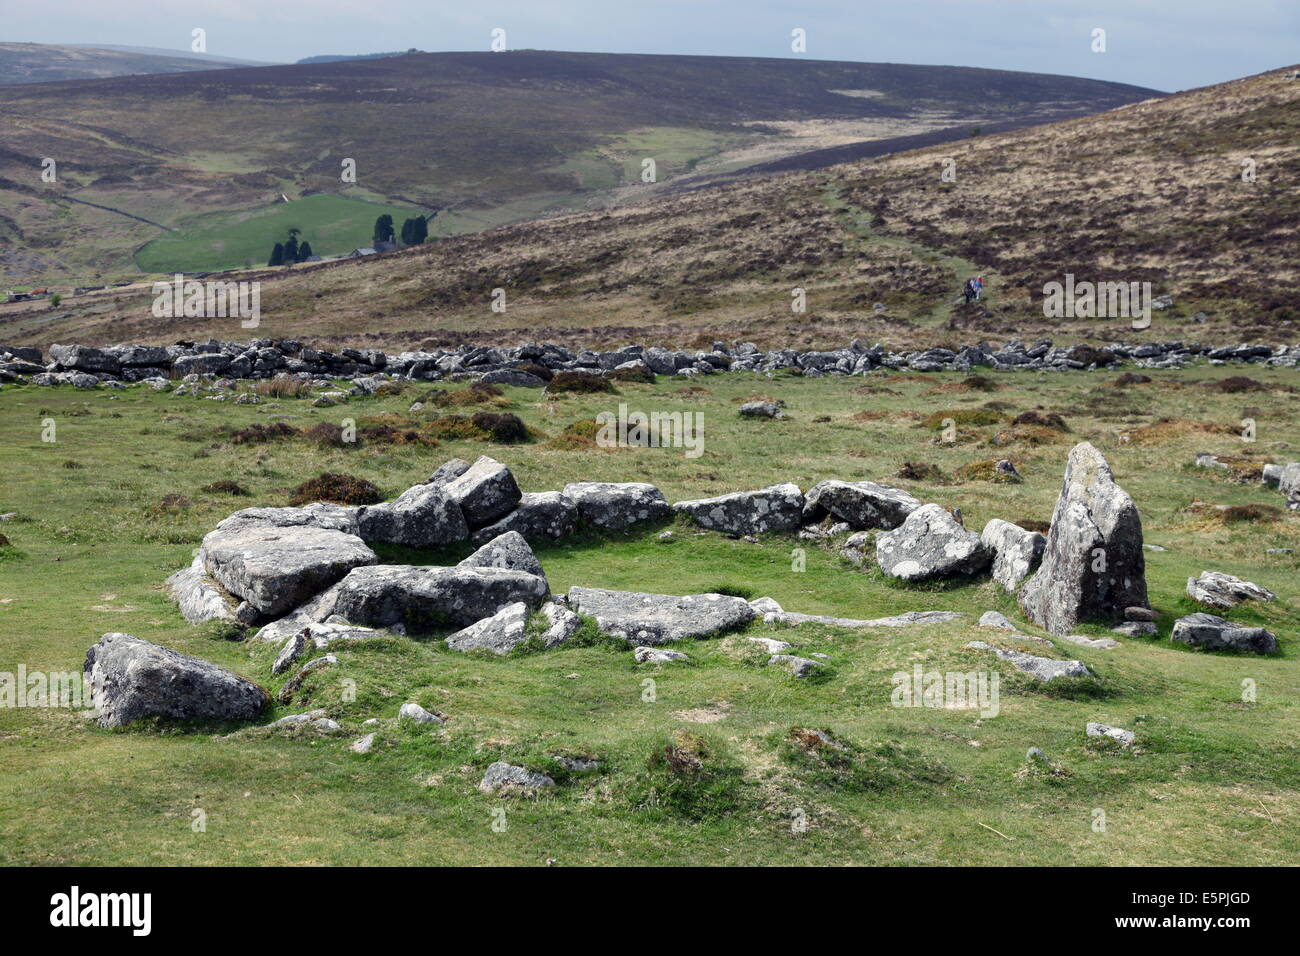 Ruins of early Bronze Age house, about 3500 years old, Grimspound, Dartmoor National Park, Devon, England, United Kingdom Stock Photo